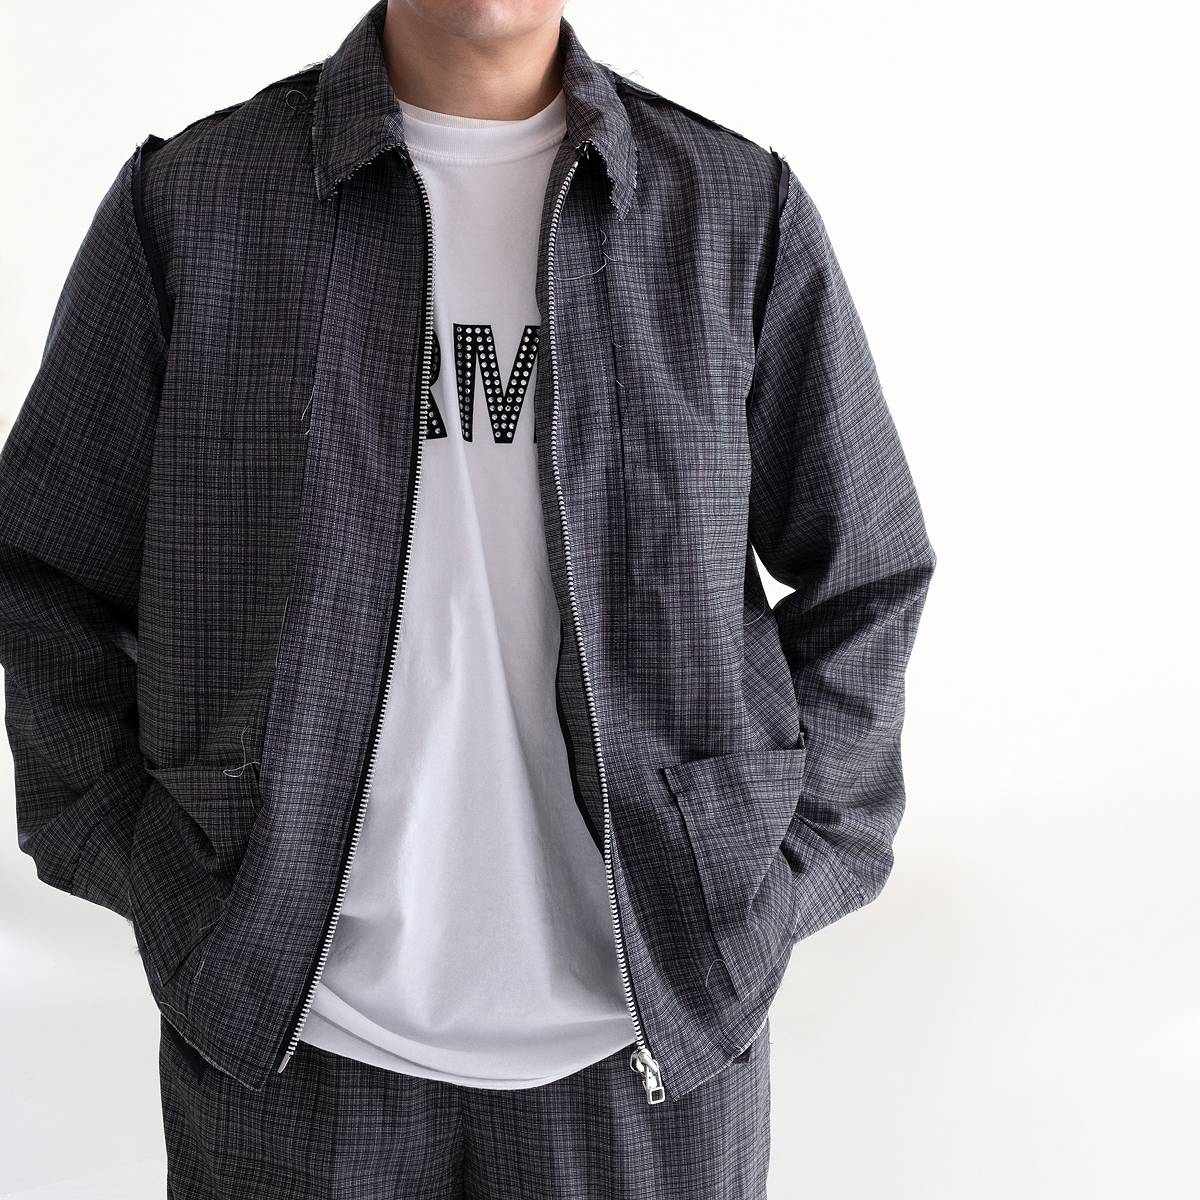 DISCOVERED 50' WOVEN ZIP UP BLOUSON